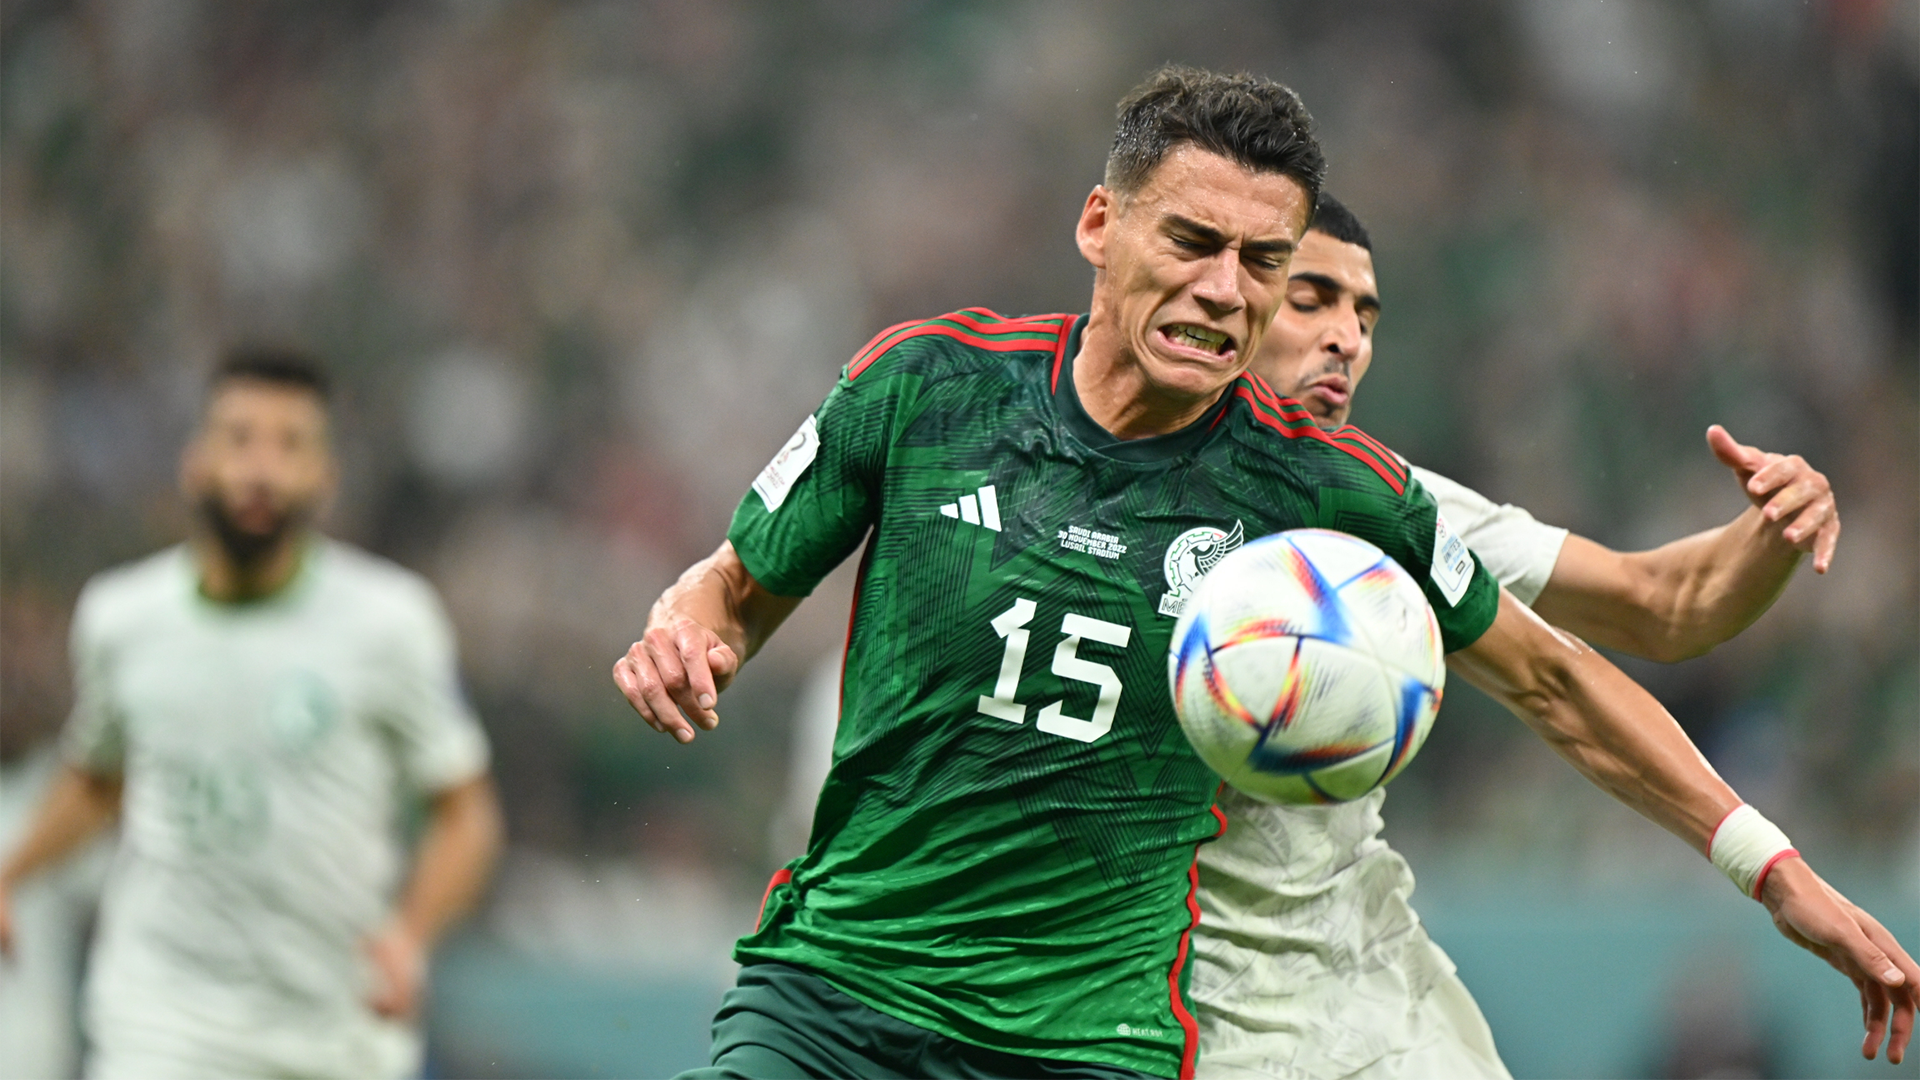 Suriname vs Mexico Where to watch the match online, live stream, TV channels and kick-off time Goal